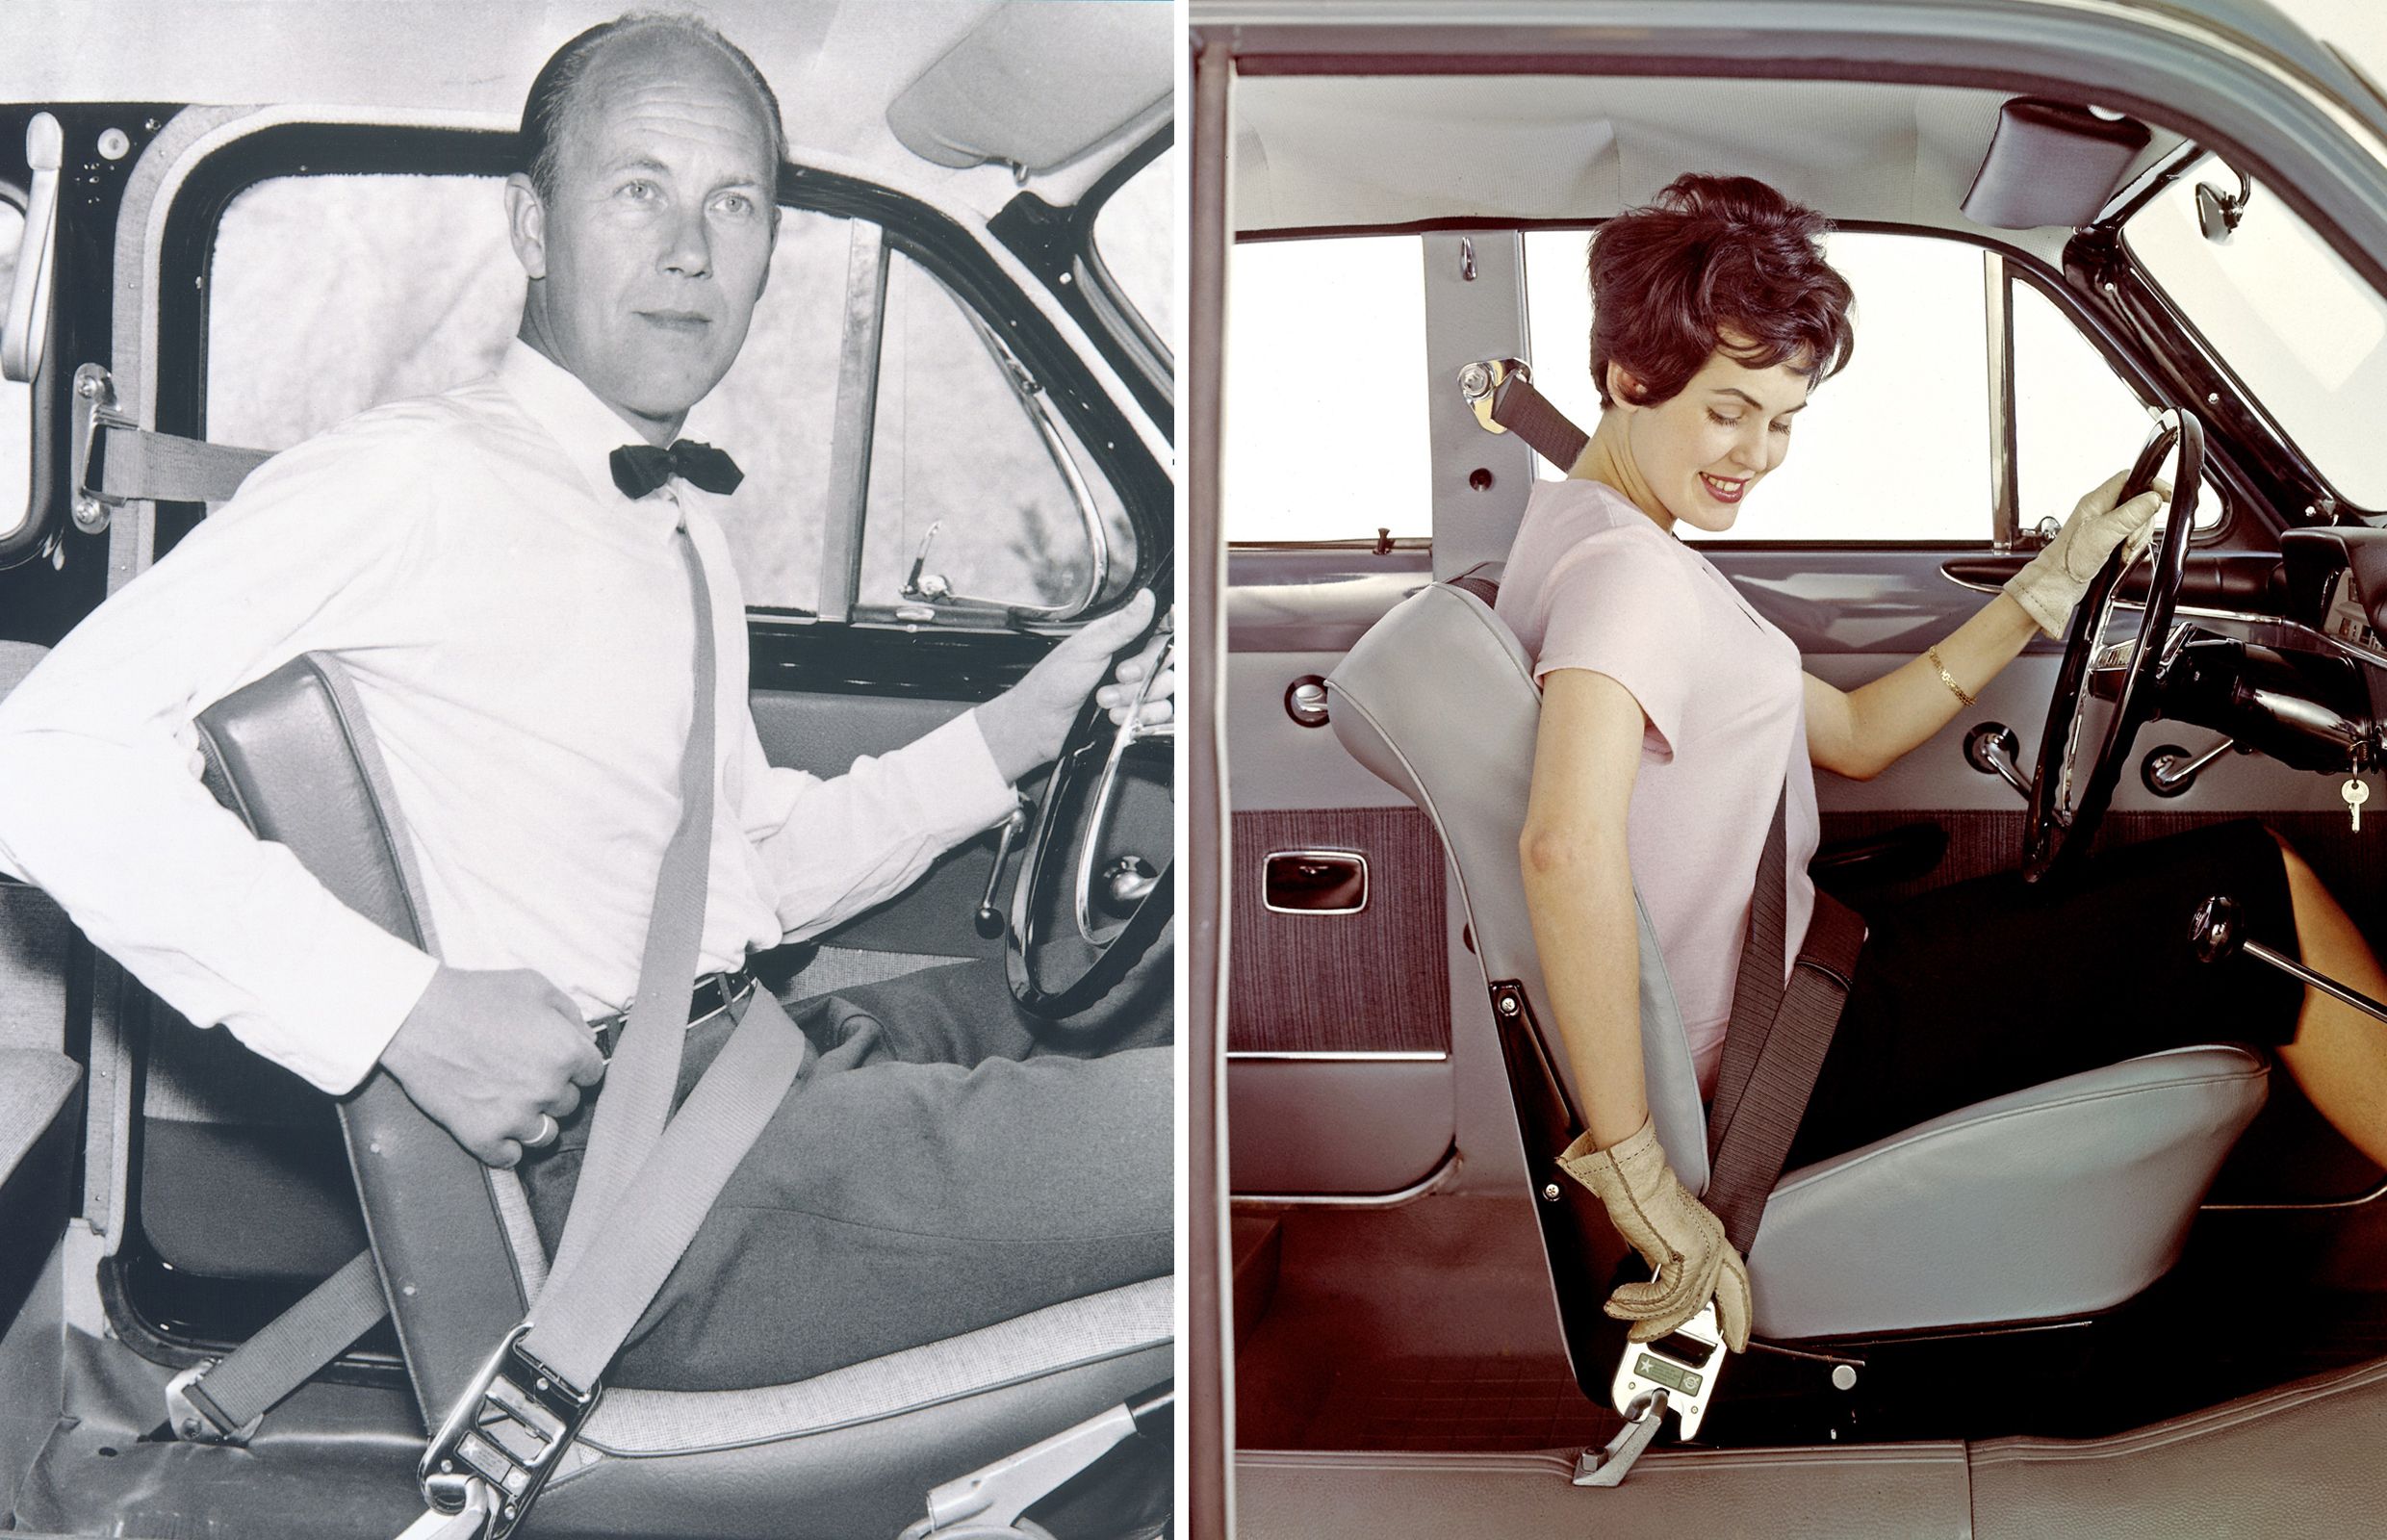 A Not So Brief History Of The Seatbelt